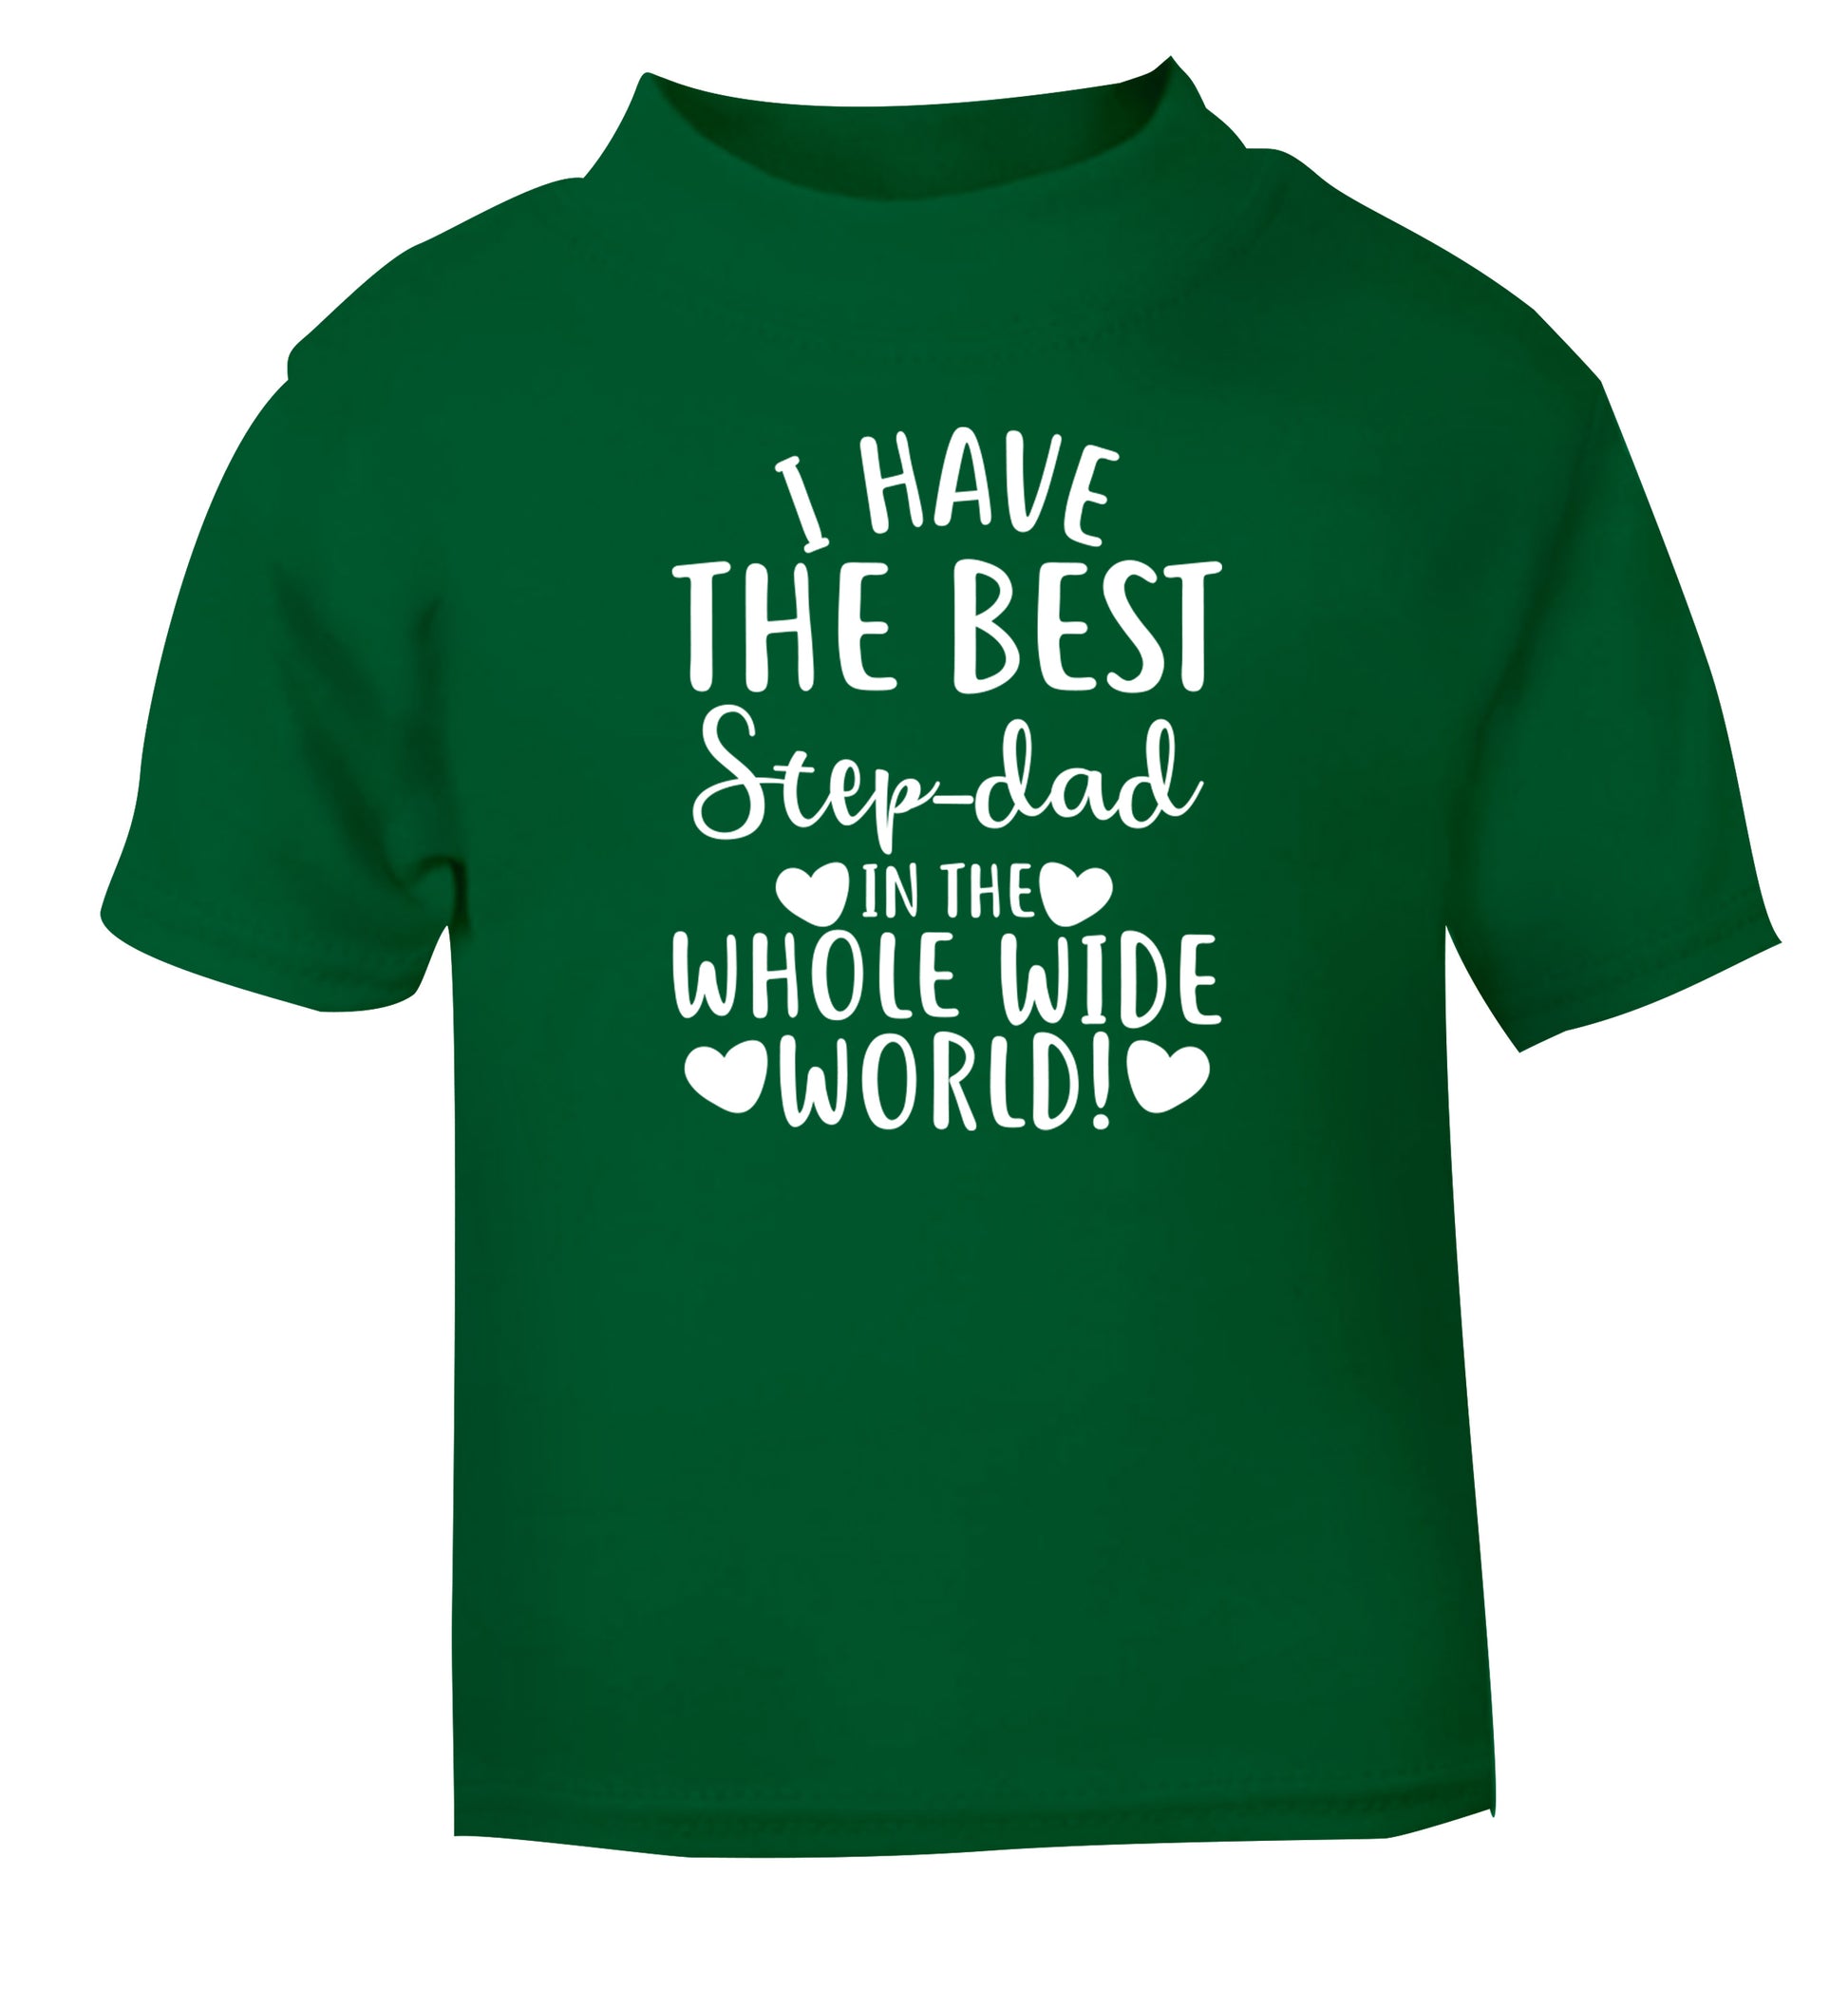 I have the best step-dad in the whole wide world! green Baby Toddler Tshirt 2 Years